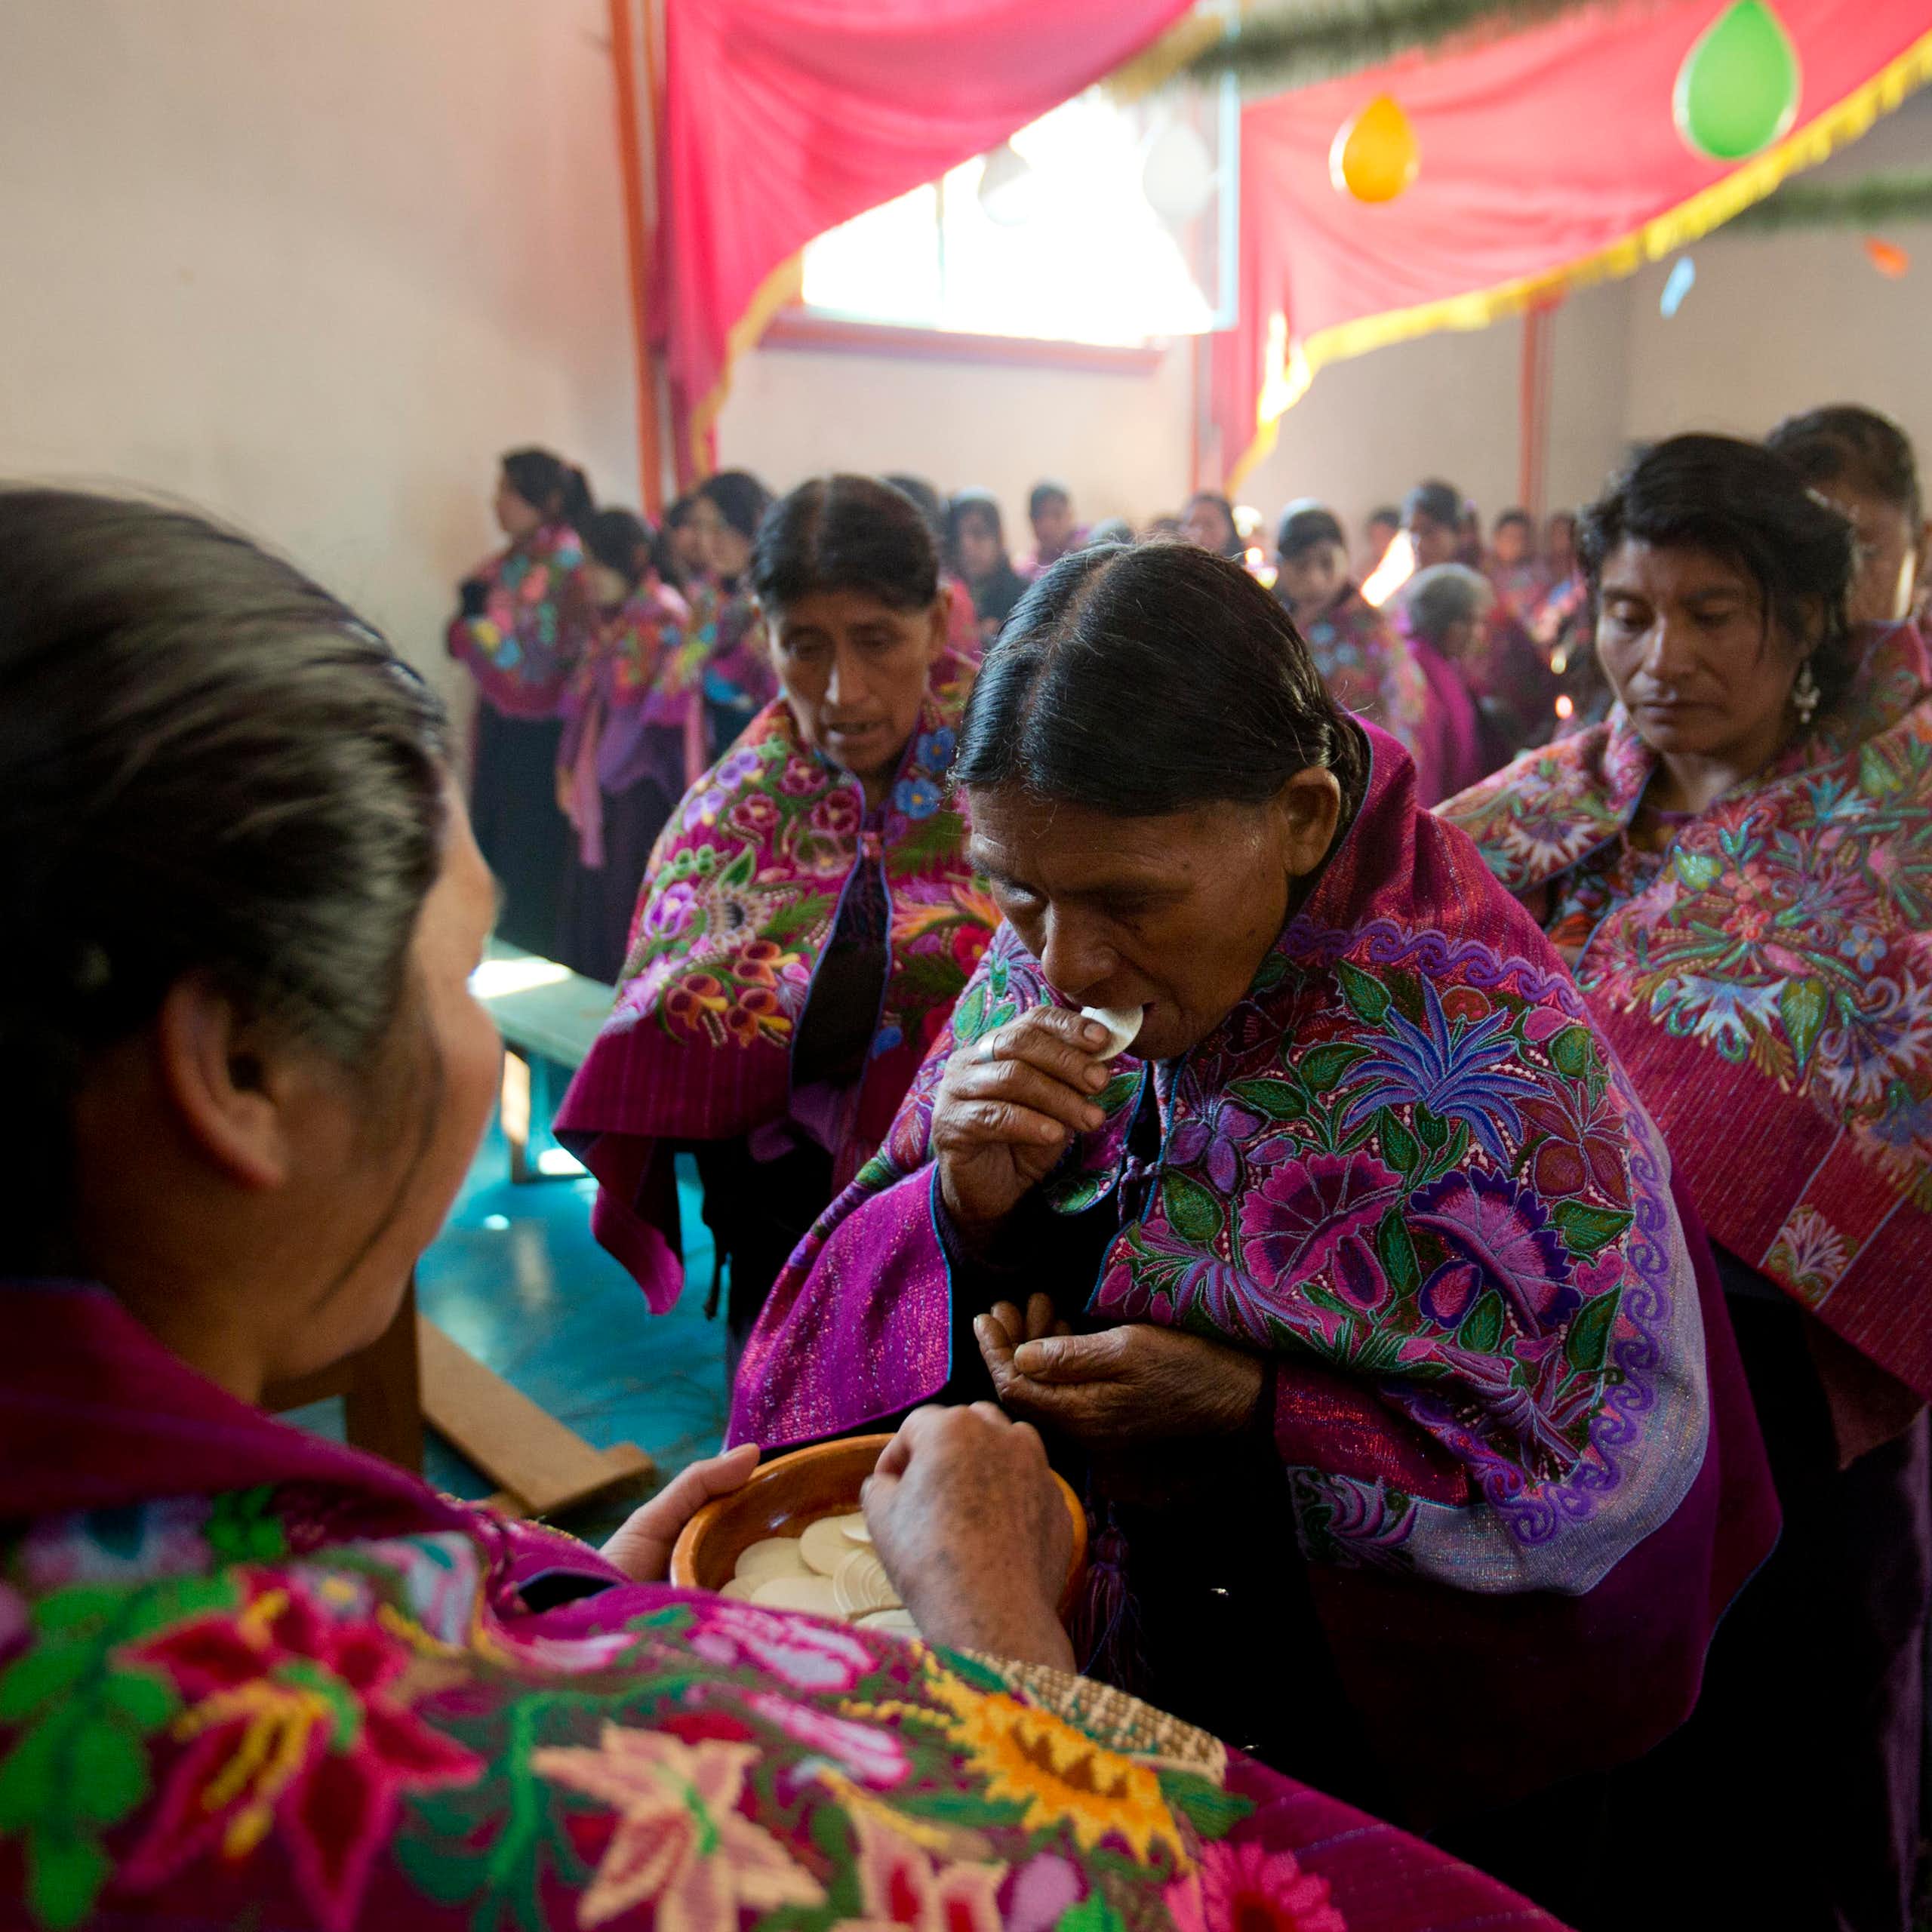 Lines of women in richly embroidered red and purple shawls, with a woman in front holding a plate with wafers on it.